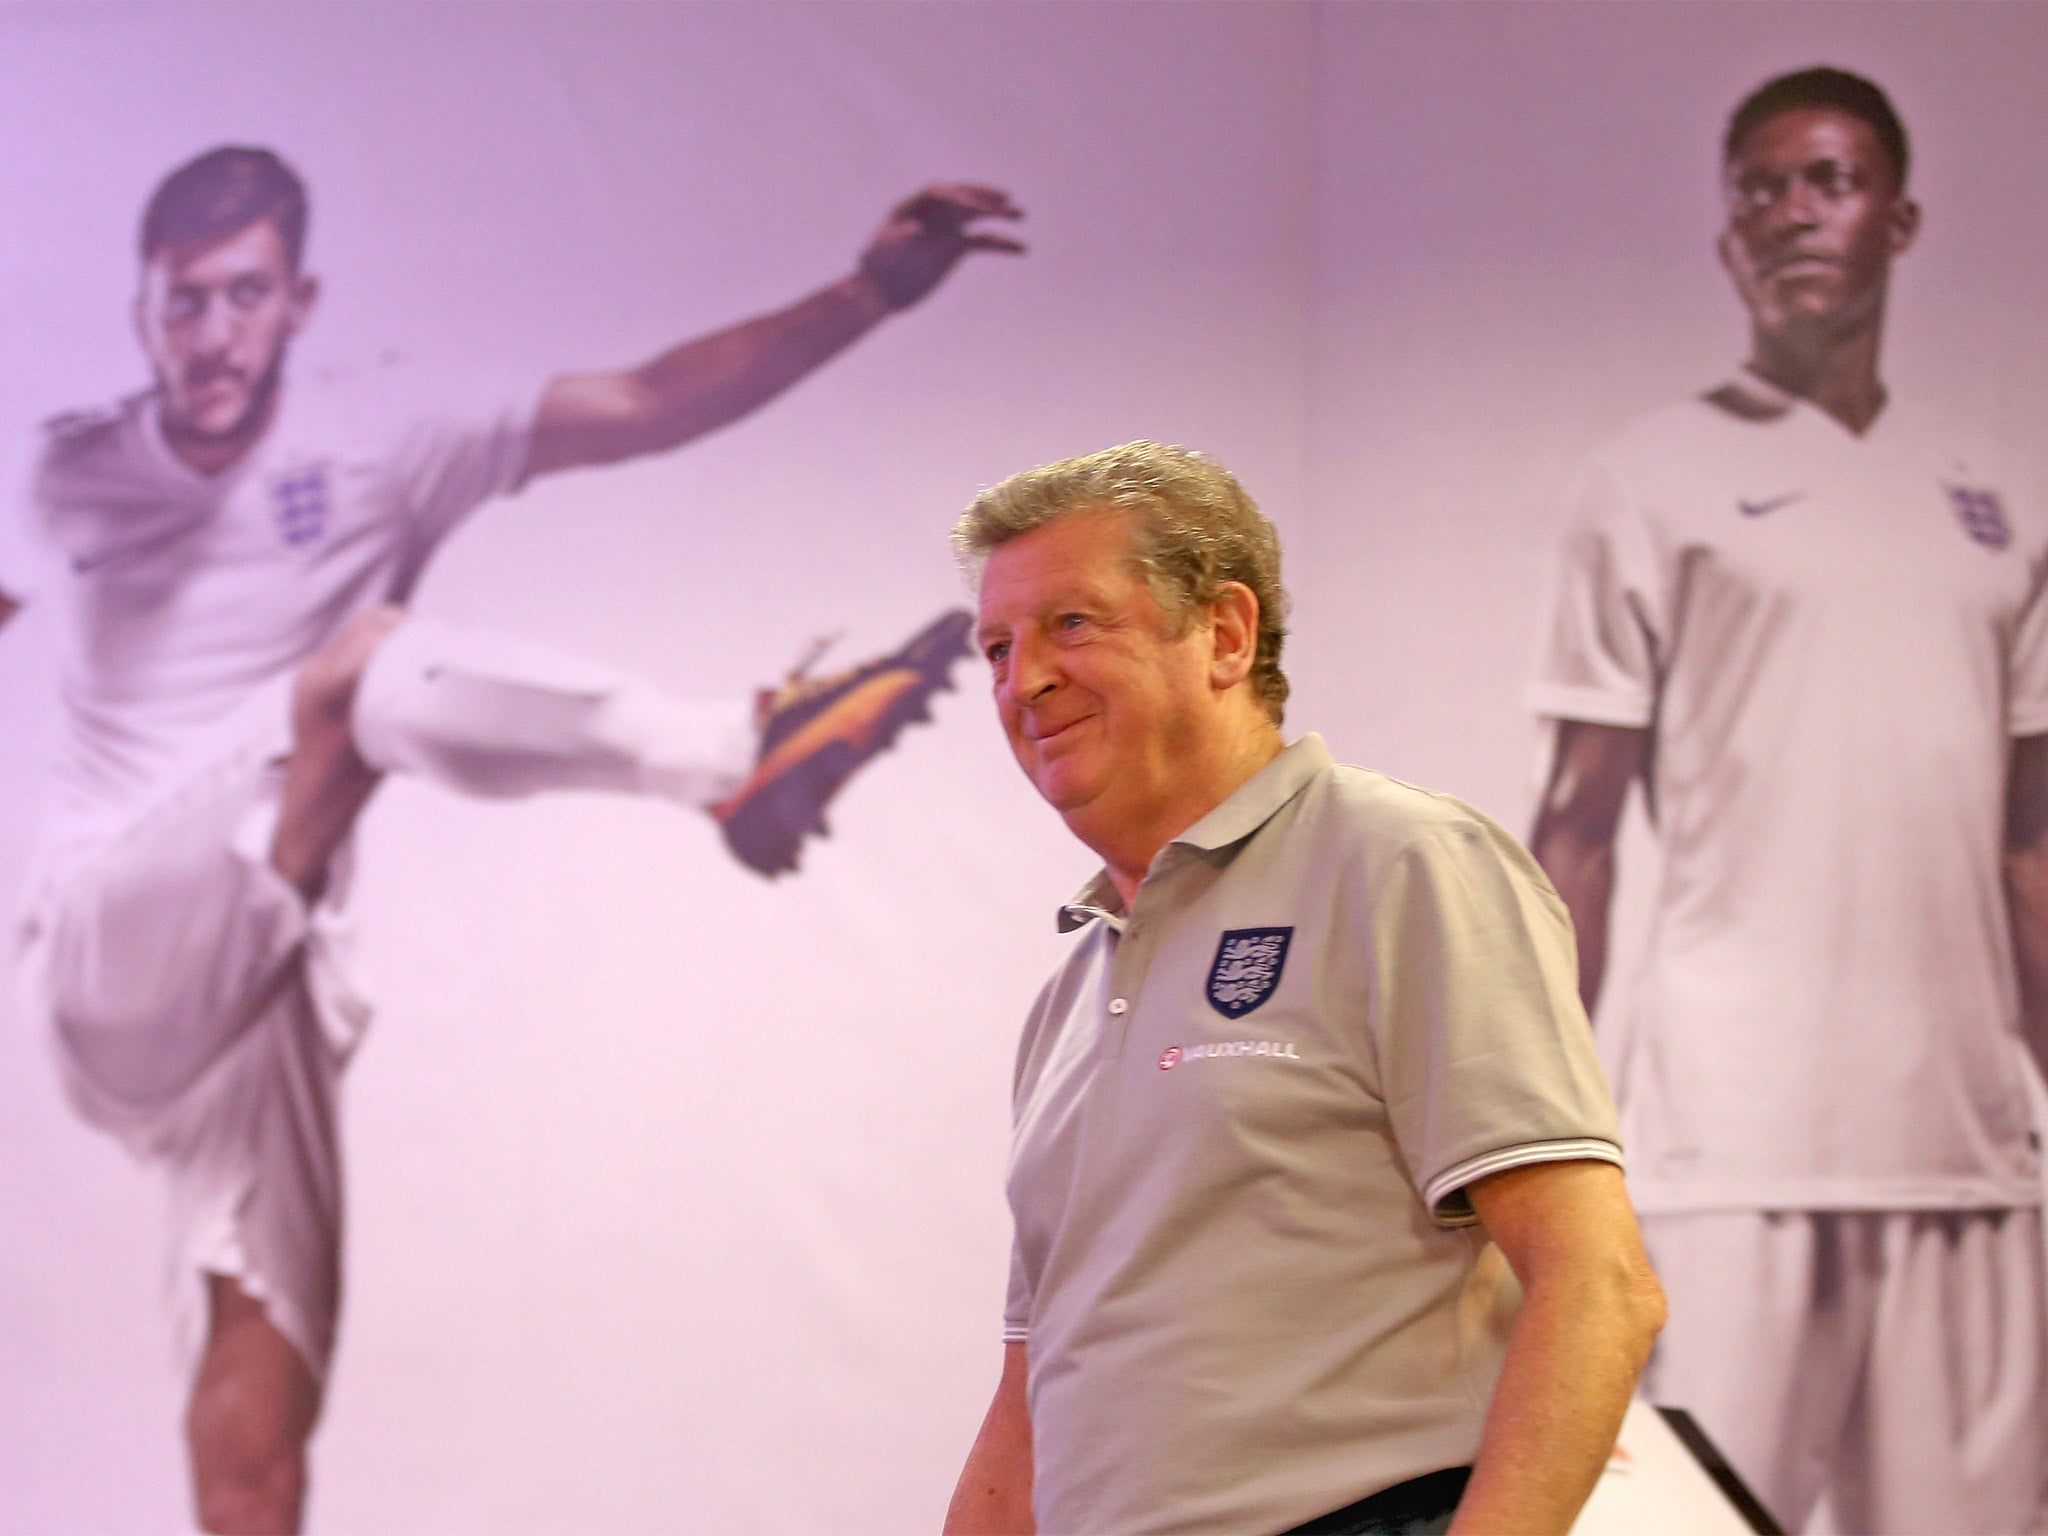 The England manager, Roy Hodgson, walks into his press conference past images of his squad members Adam Lallana and Danny Welbeck in Rio de Janeiro